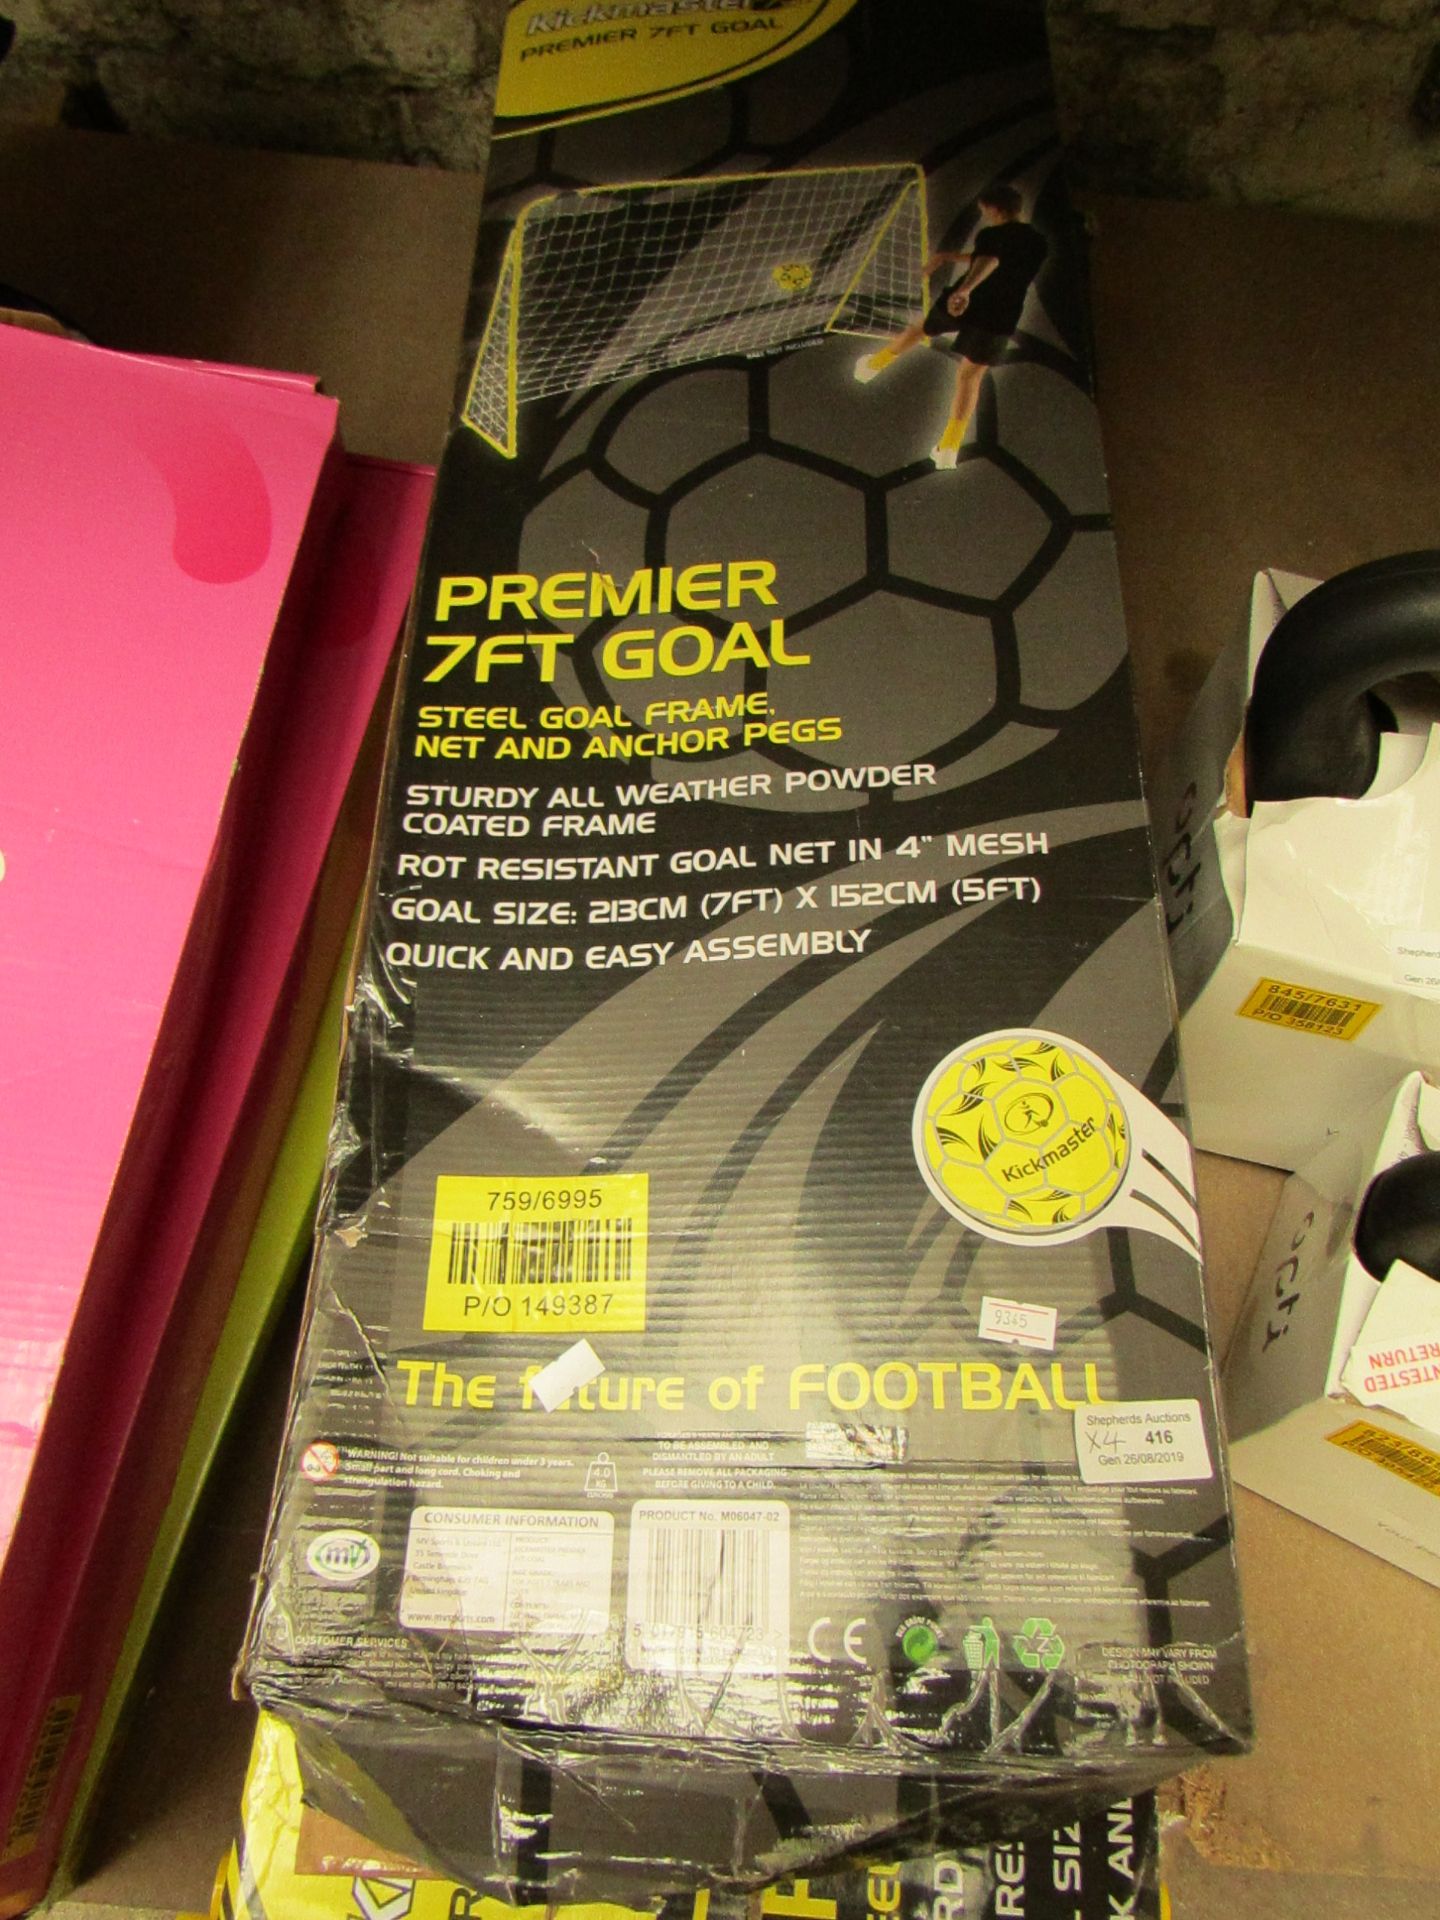 4x Kickmaster premier 7ft goal, unchecked and boxed.